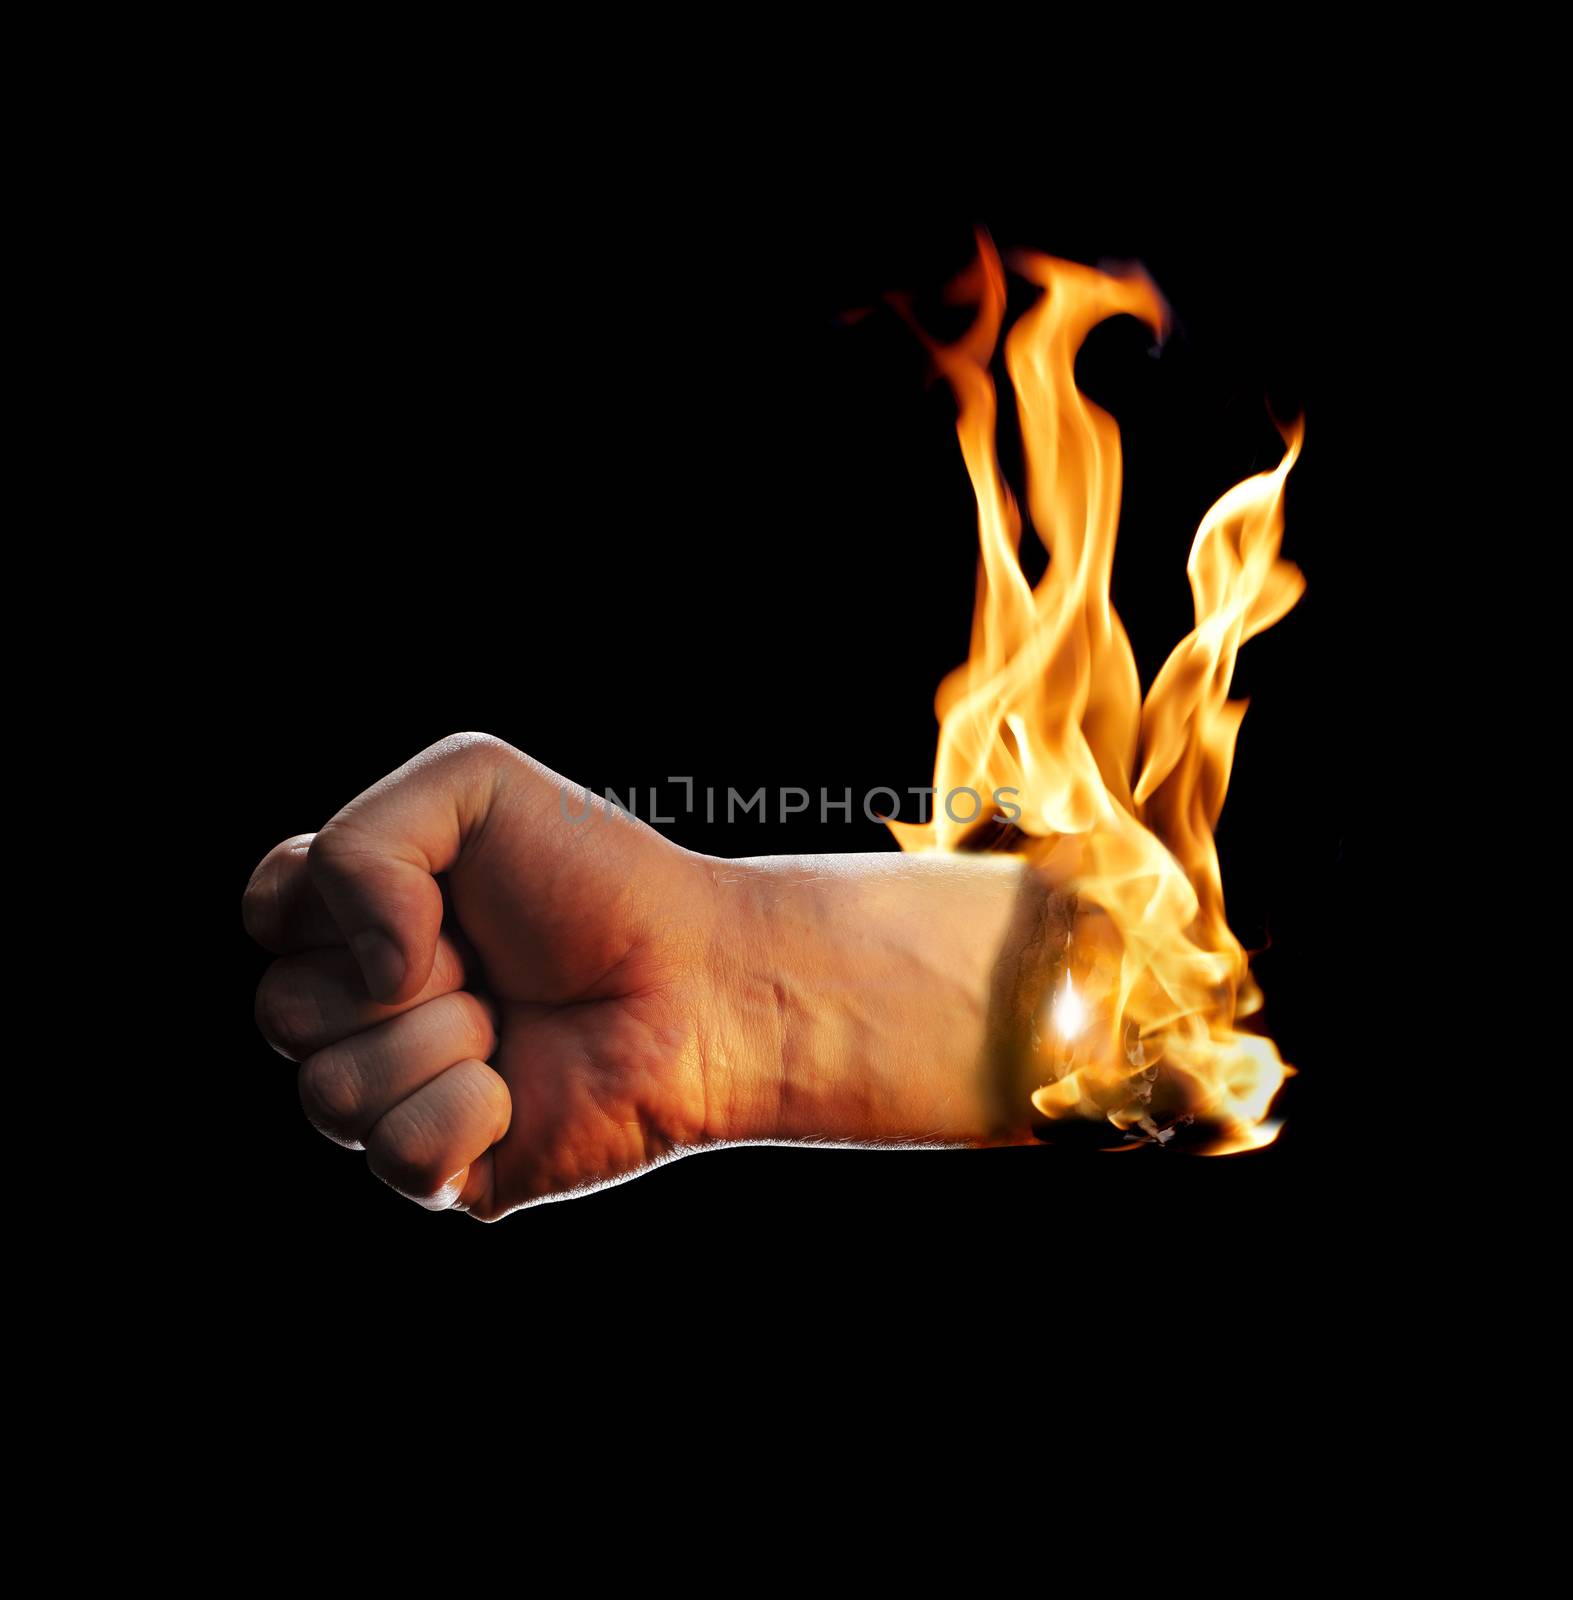 A burning fisted hand on black background.